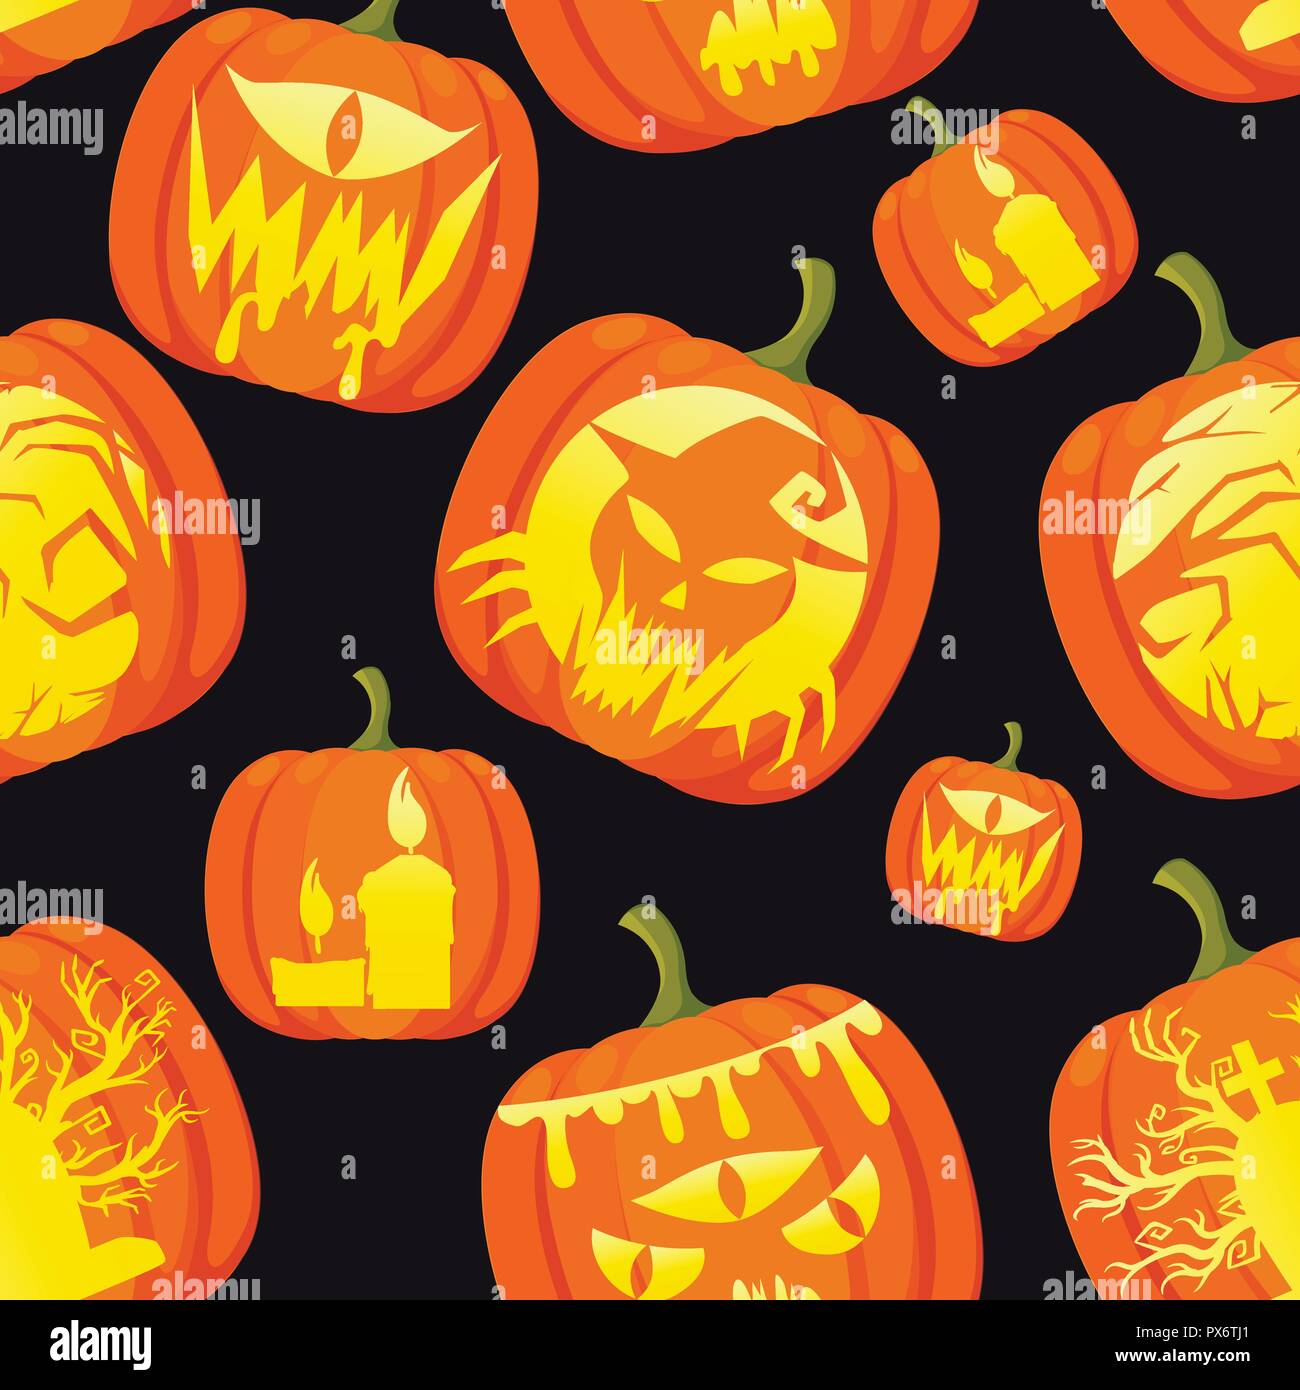 Halloween Background Wallpaper with Jack O Lantern Scary Pumpkins on Bokeh  Candle Light Stock Image  Image of layout evil 157021623